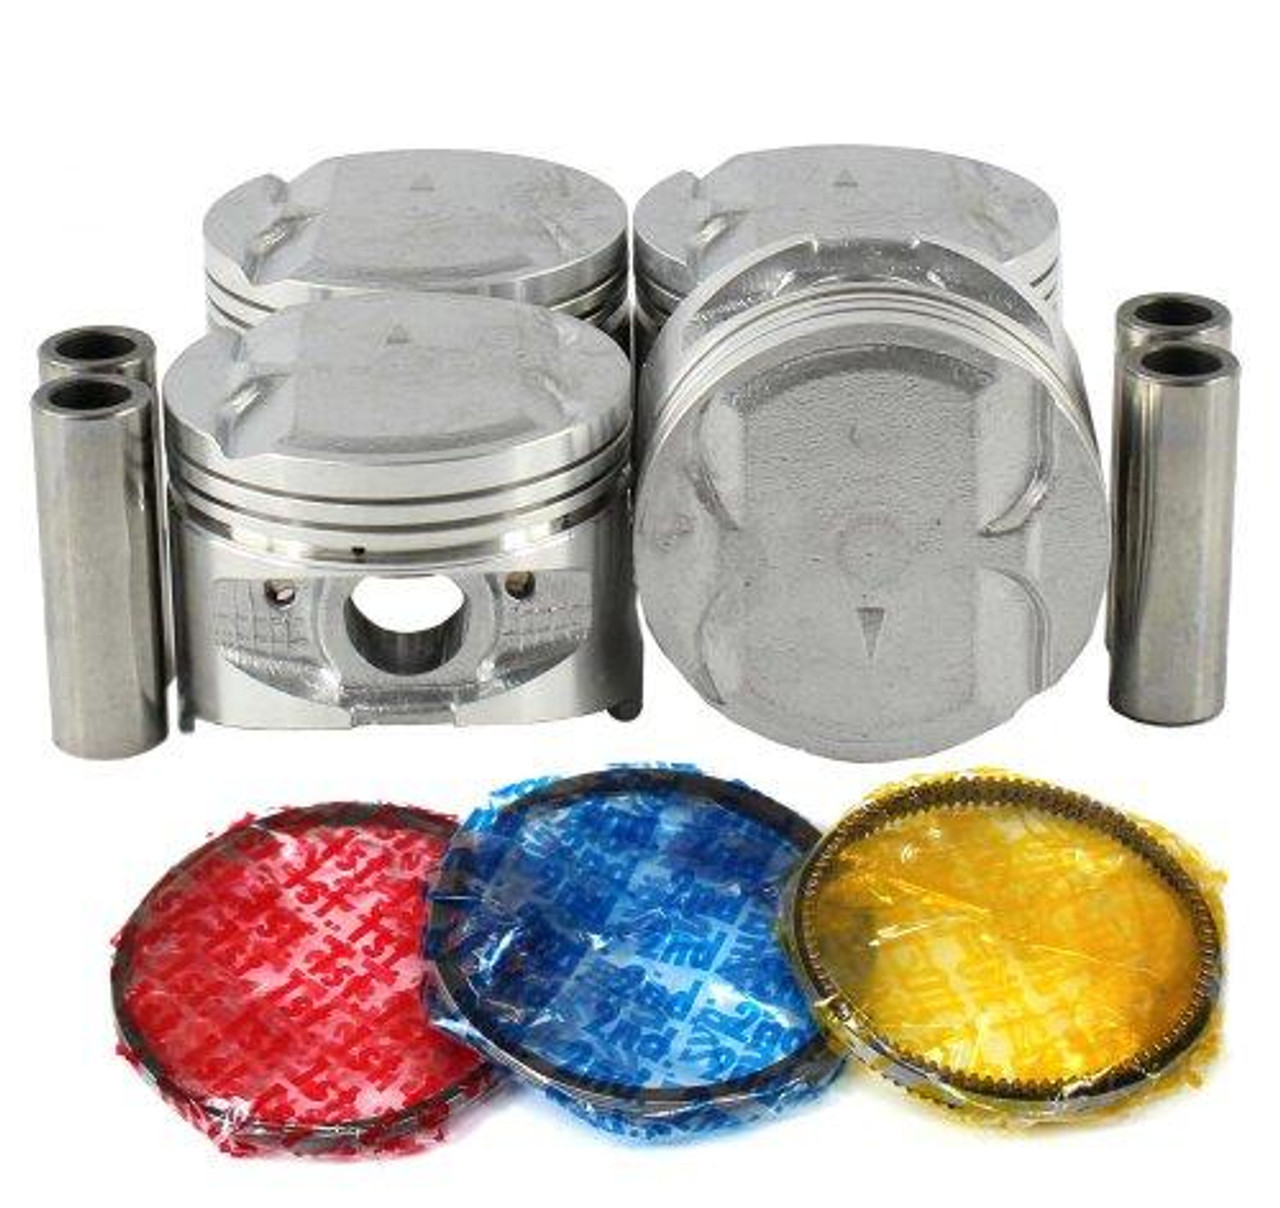 Piston Set with Rings - 1989 Eagle Summit 1.6L Engine Parts # PRK107AZE1